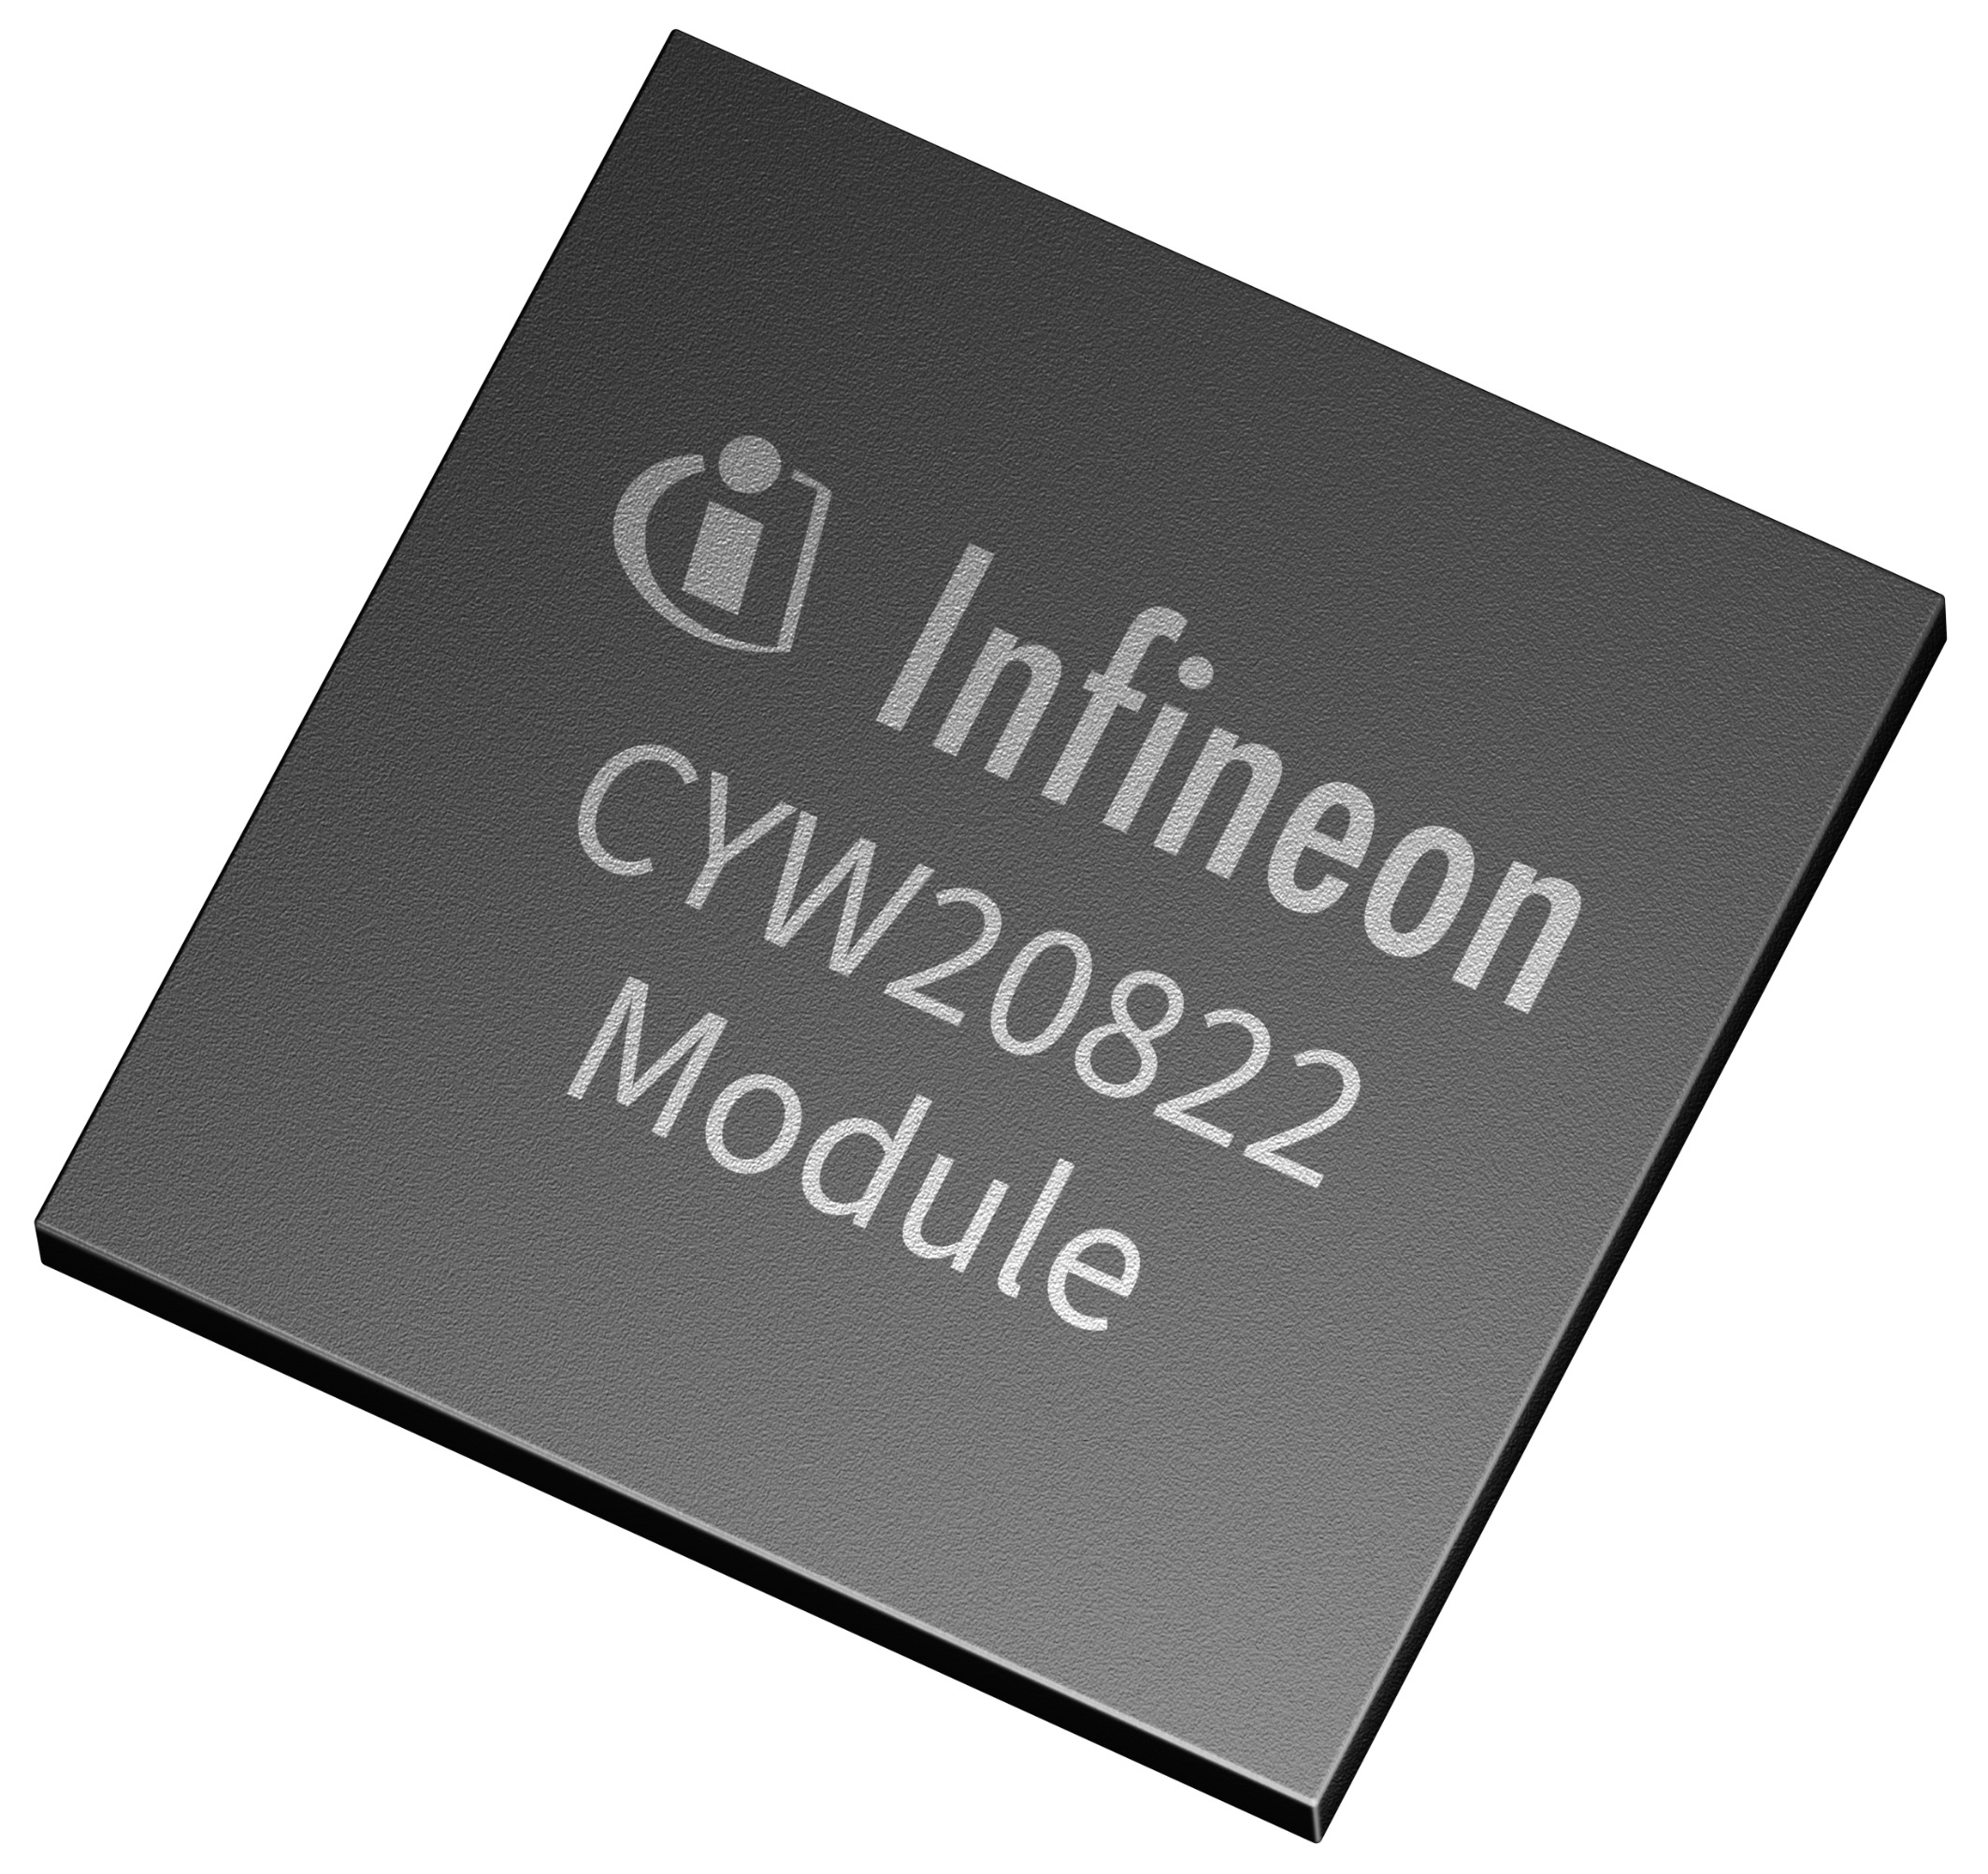 Infineon Introduces Lower-Cost Bluetooth Long-Range Module, CYW20822-P4TAI040, for Low-Power Applications